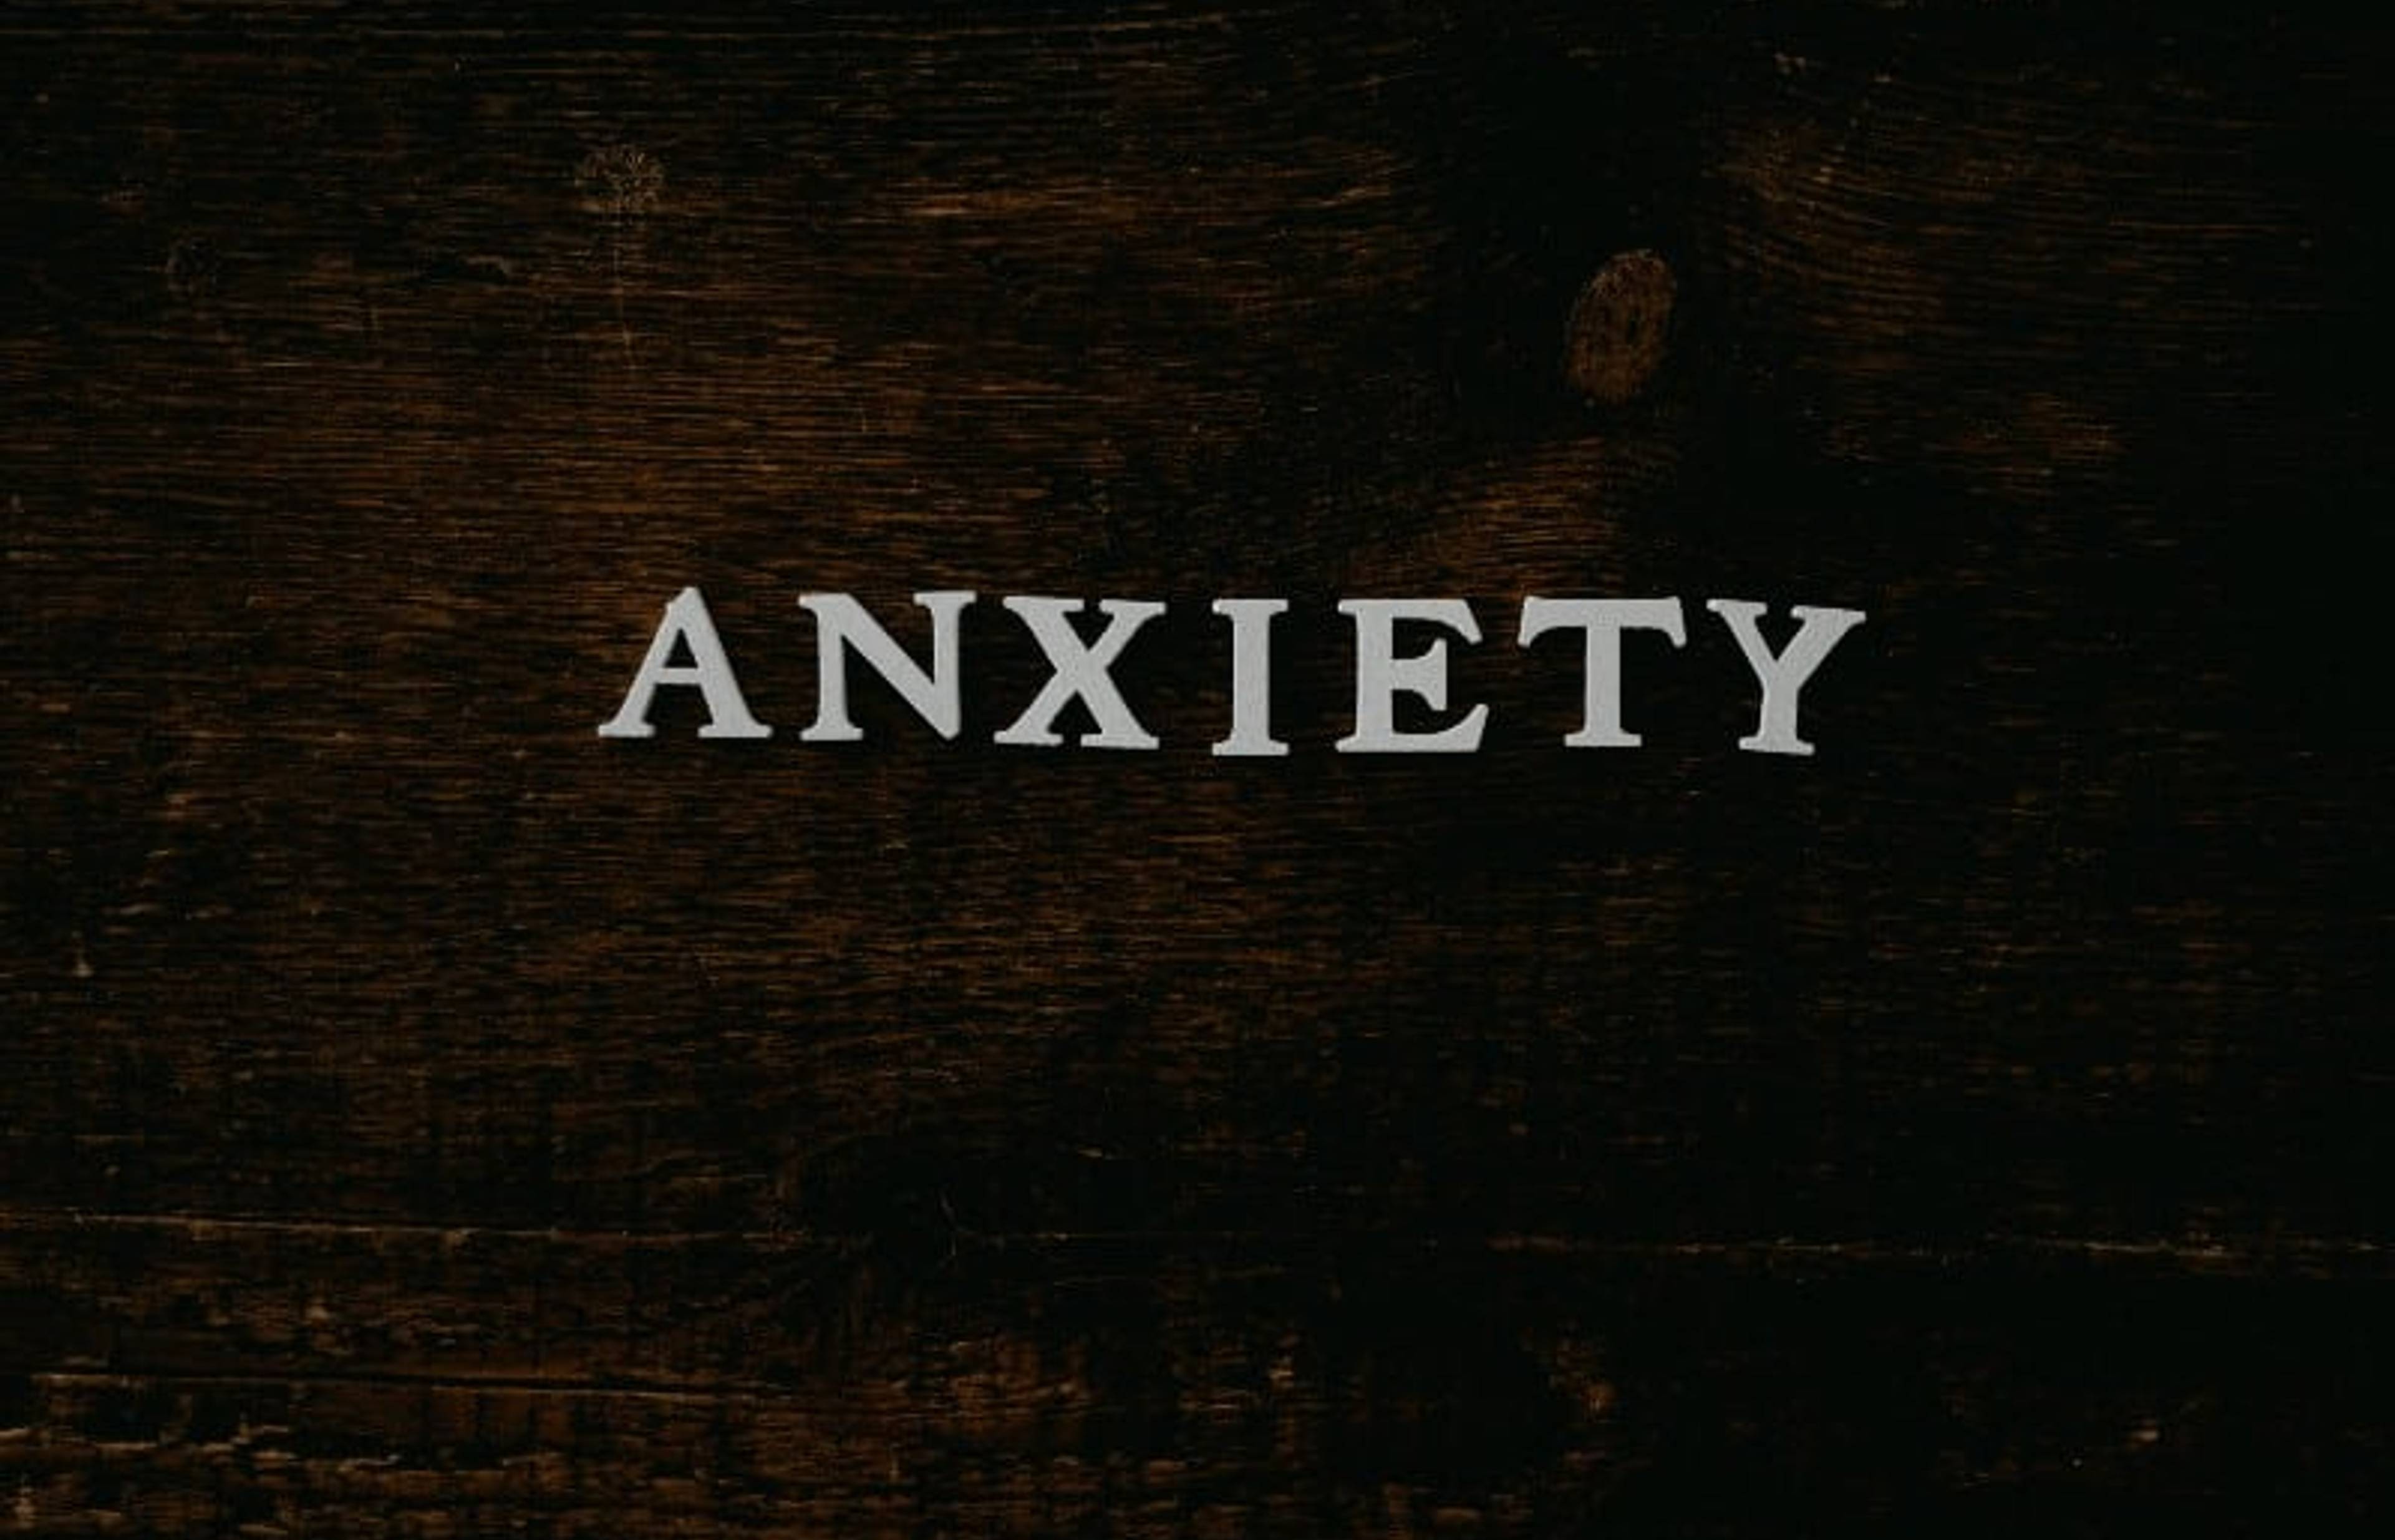 A Quick Guide to Anxiety (and Relevant Tooled Up Resources)